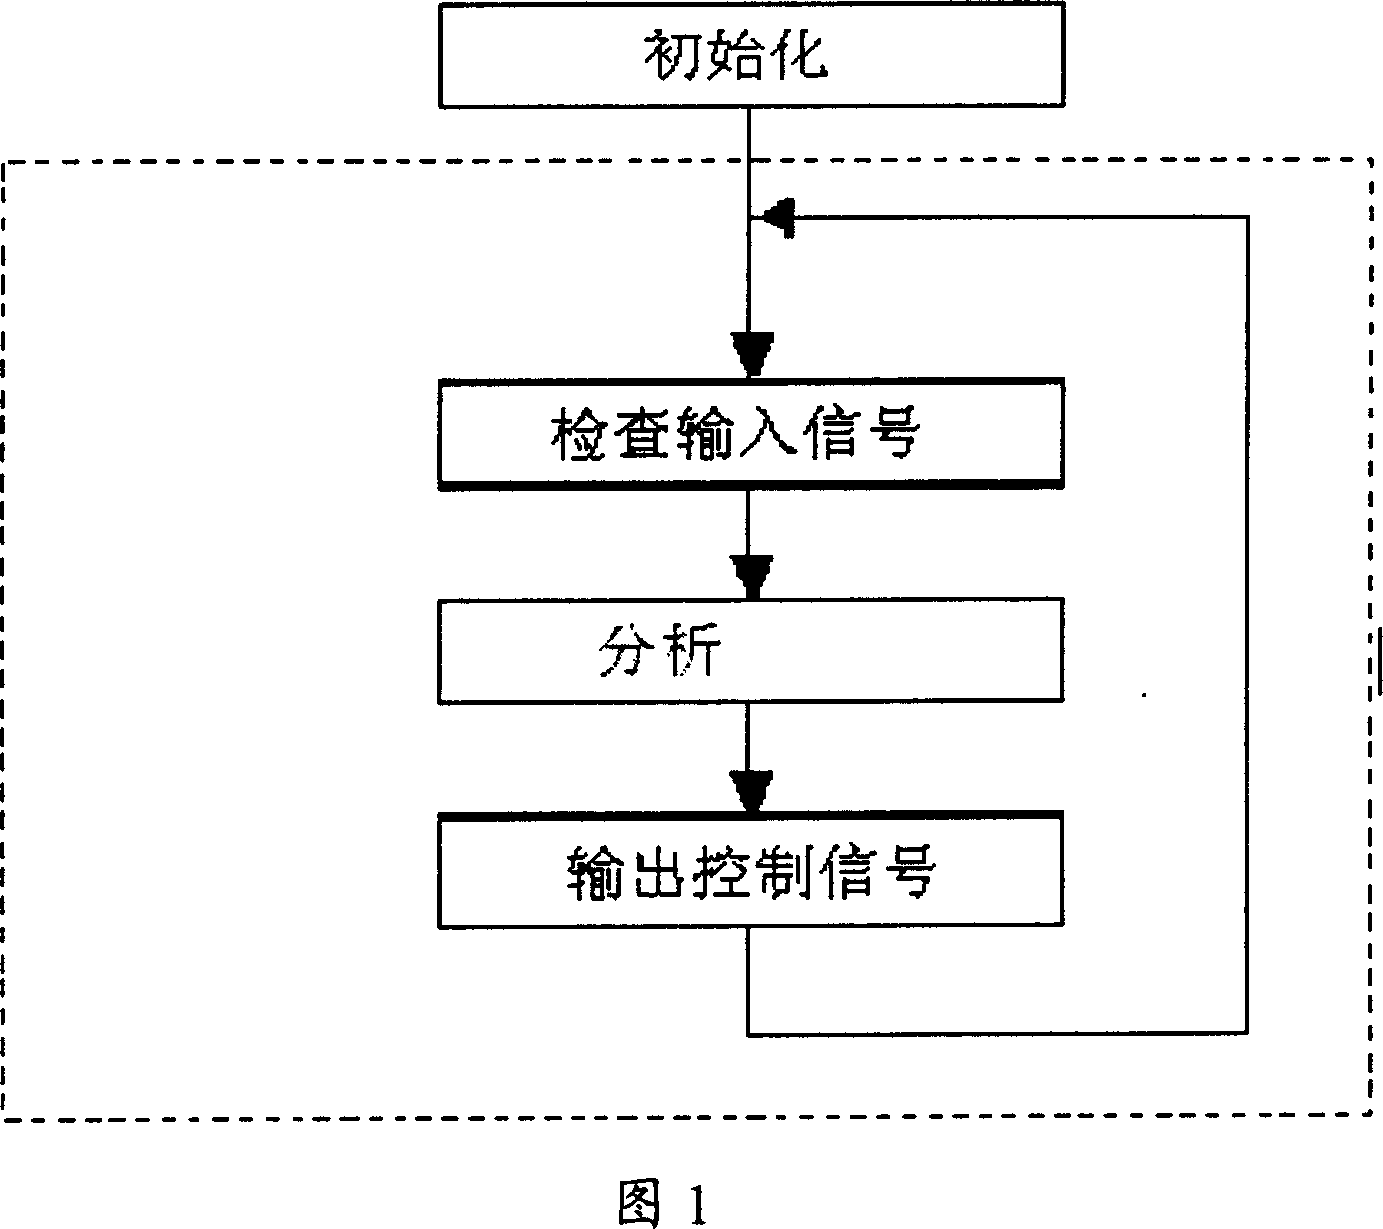 Method for setting up parameter to electric vehicle controller